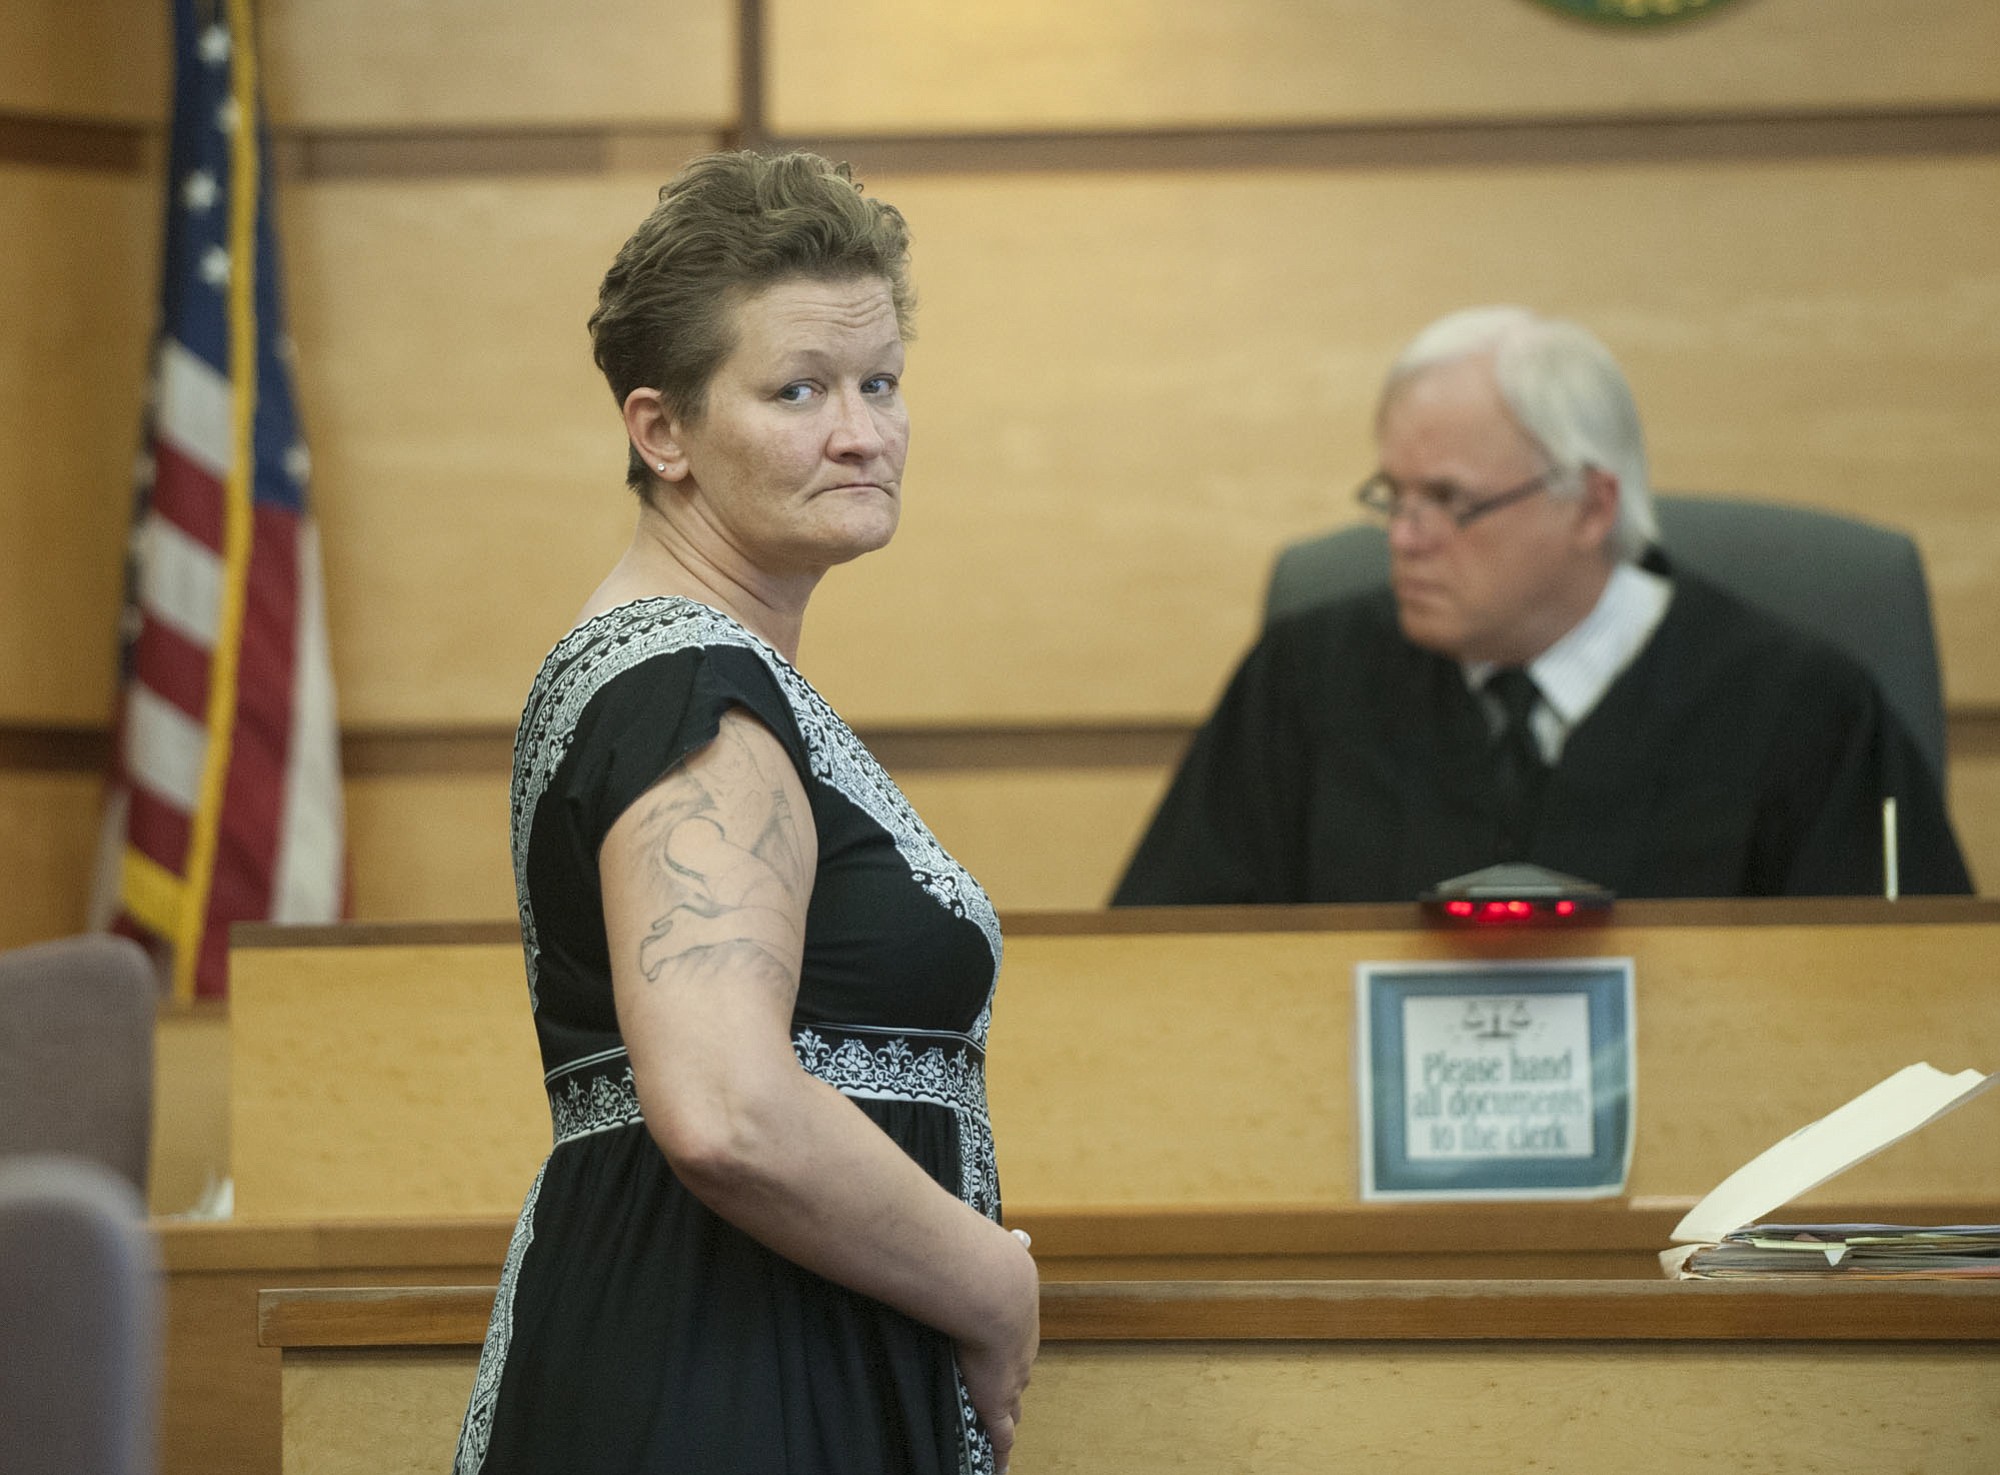 Karin Renae Cole, 47, appears in Clark County Superior Court on July 30 to change her plea to guilty on two counts of possession of methamphetamine with intent to deliver.